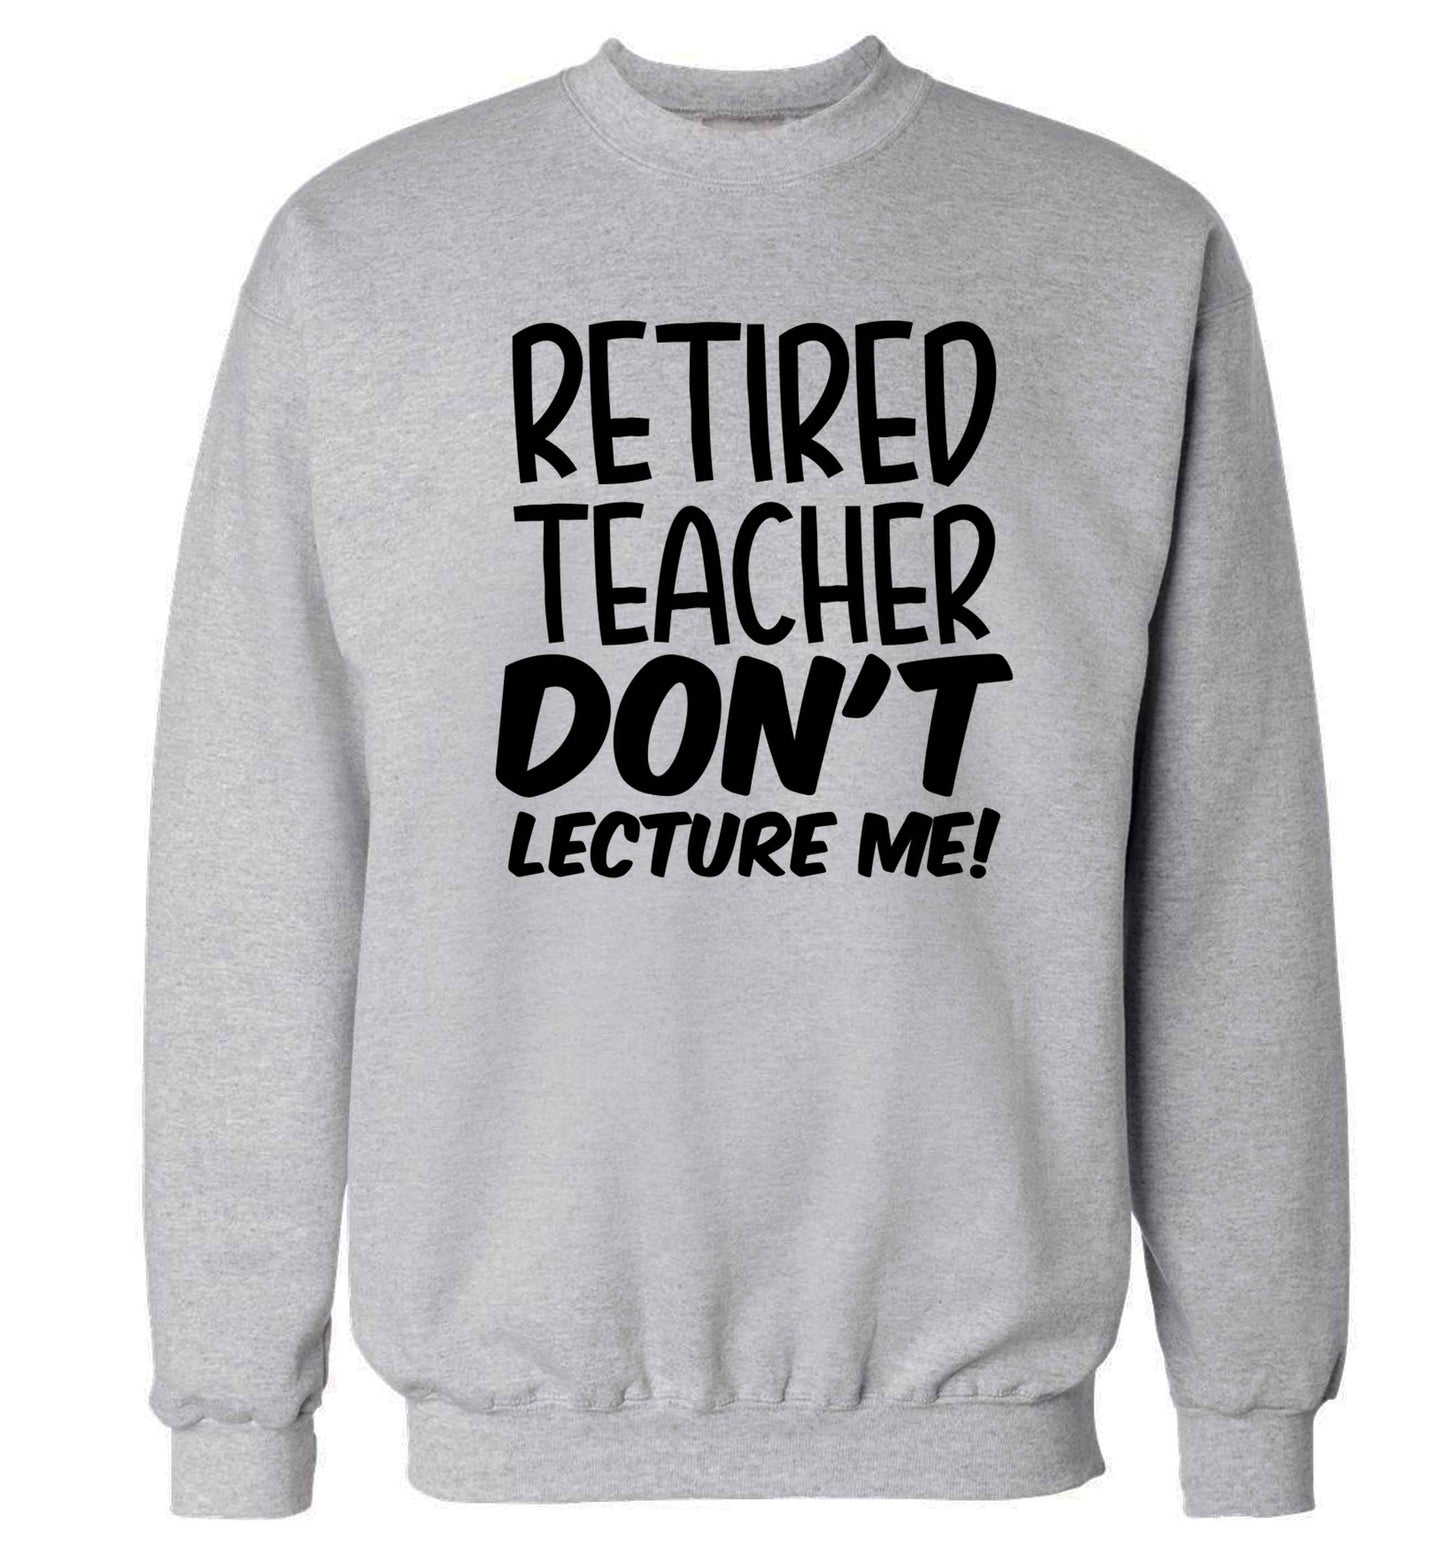 Retired teacher don't lecture me! Adult's unisex grey Sweater 2XL